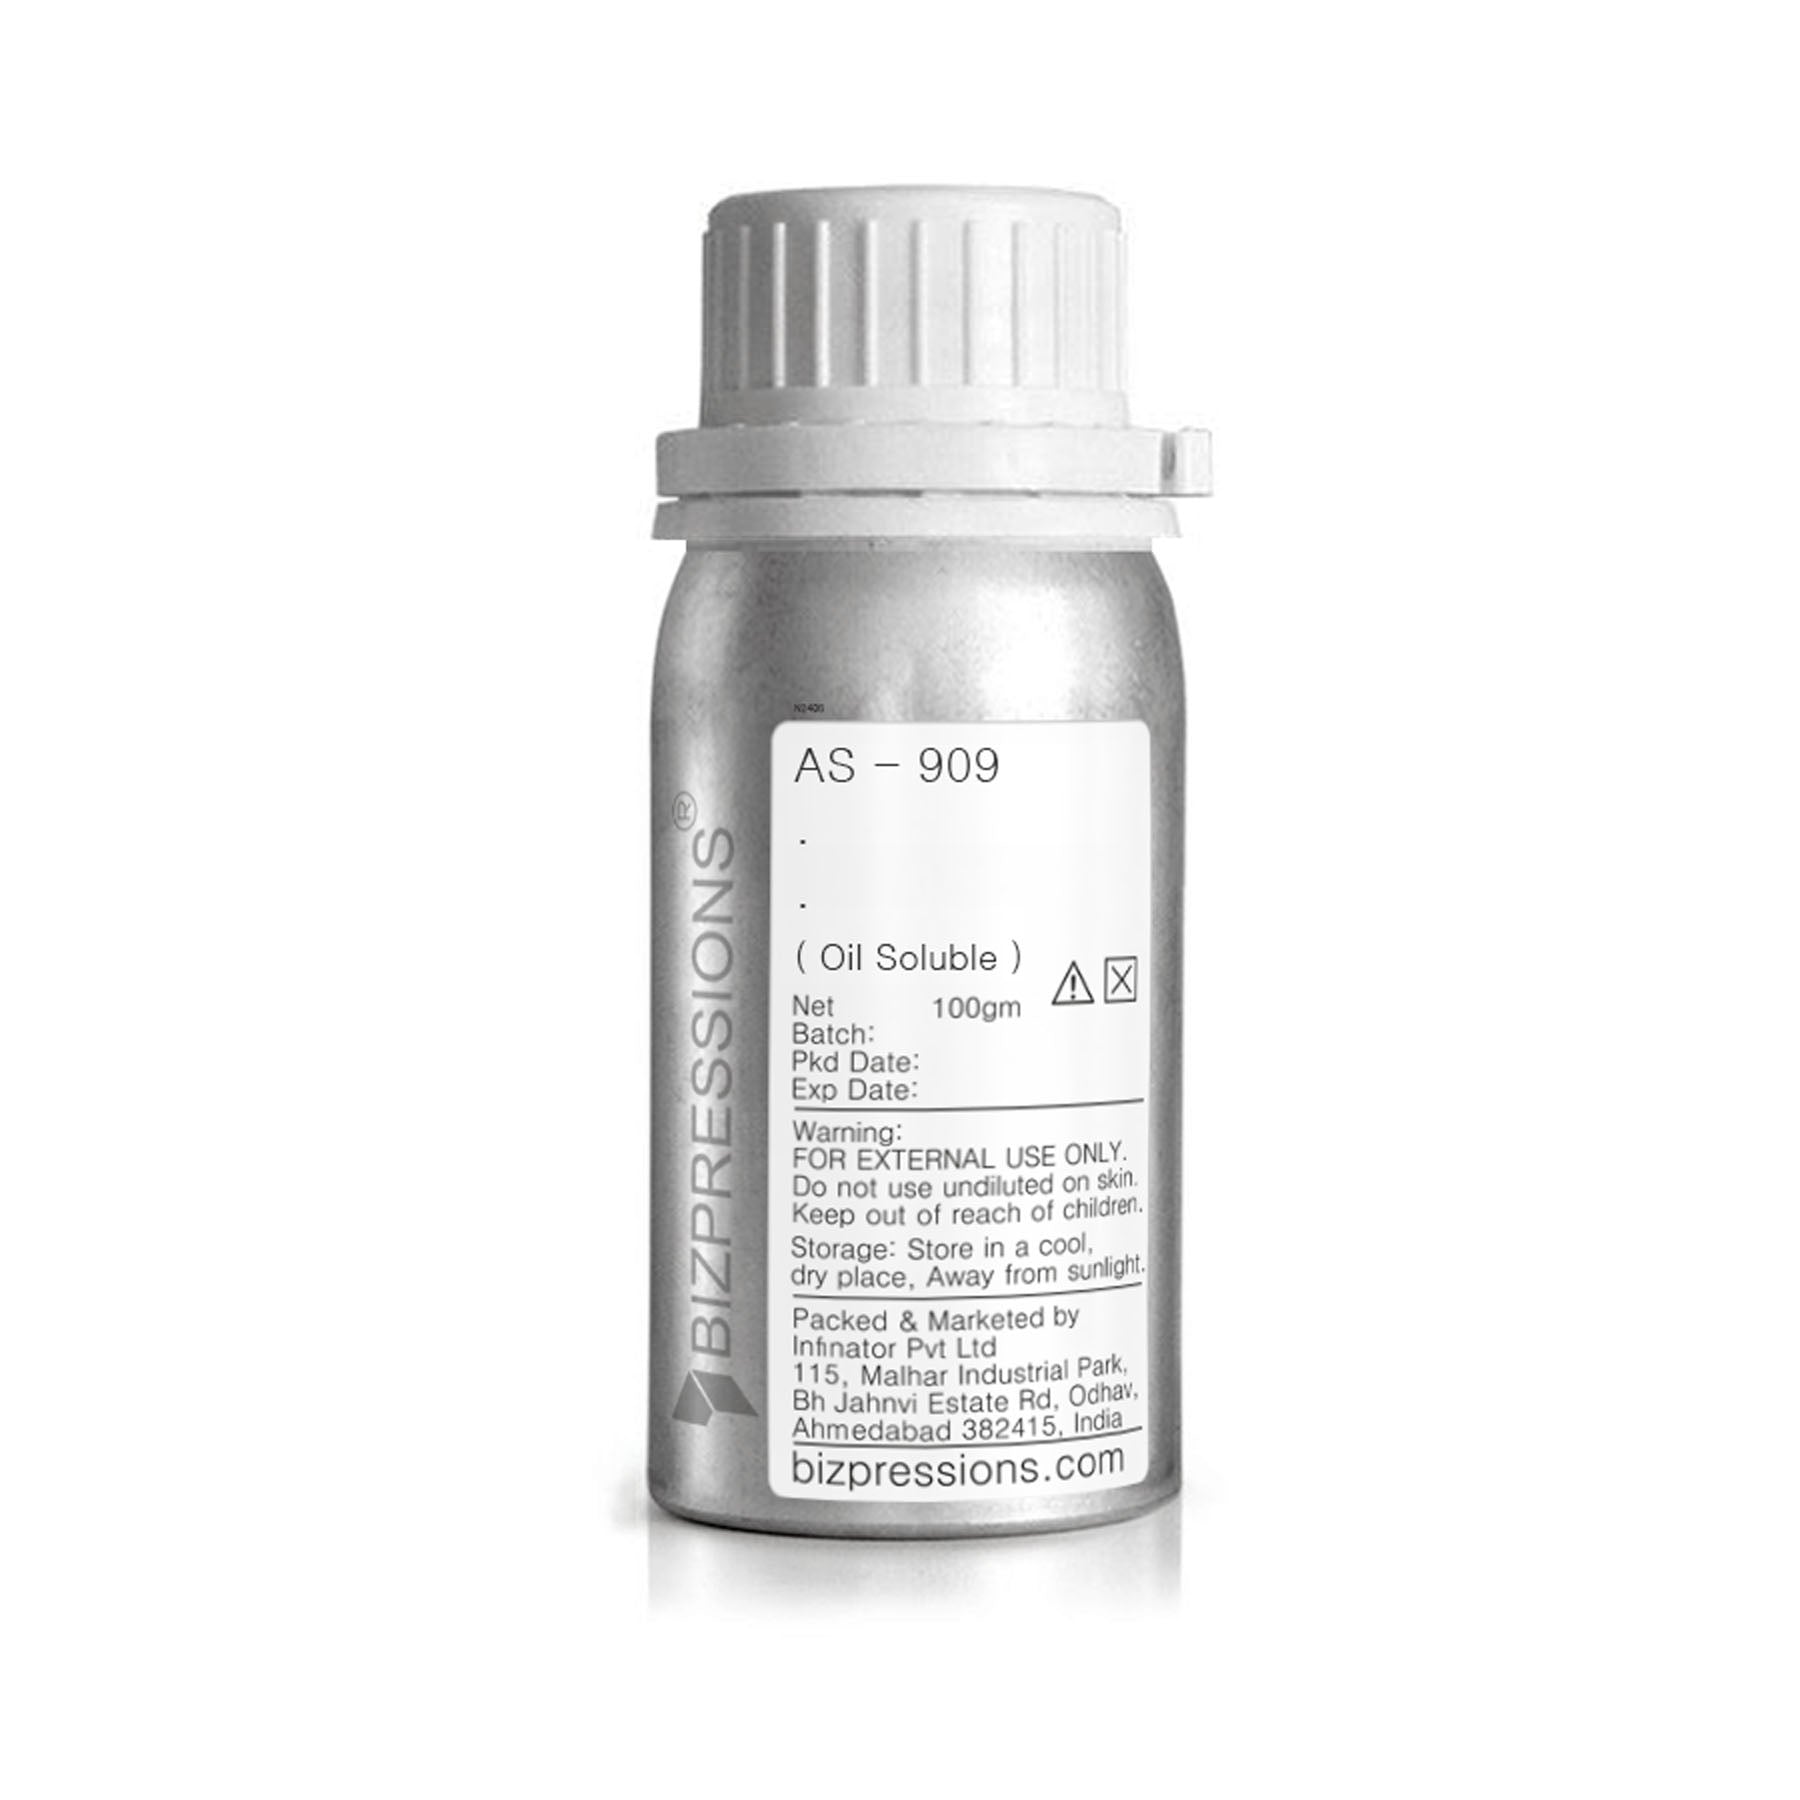 AS - 909 - Fragrance ( Oil Soluble ) - 100 gm